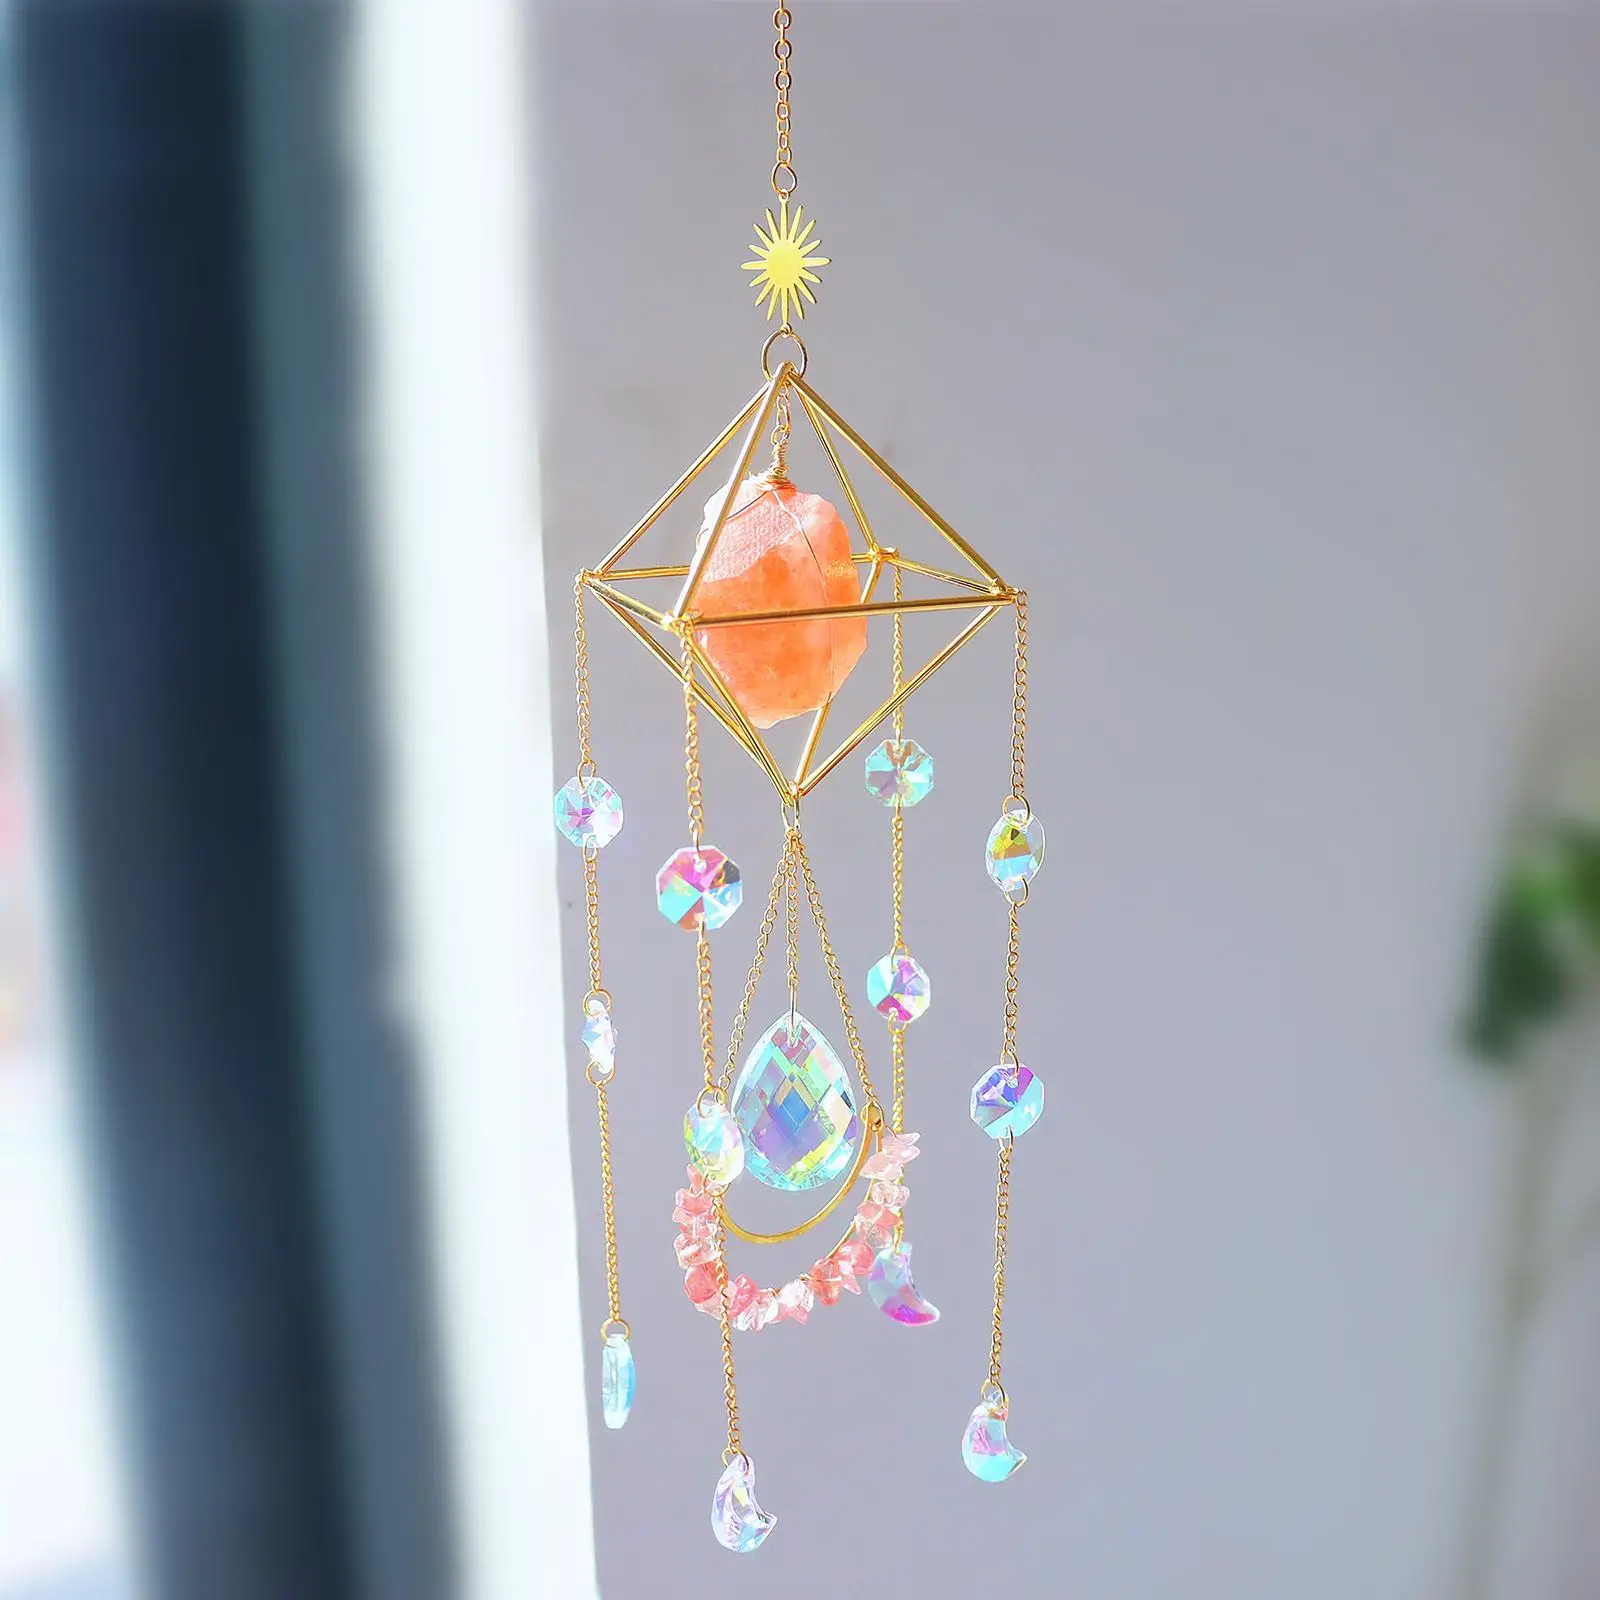 Crystal Wind Chimes Pendant Window Rainbow Maker Prism Ball Balcony Outdoor